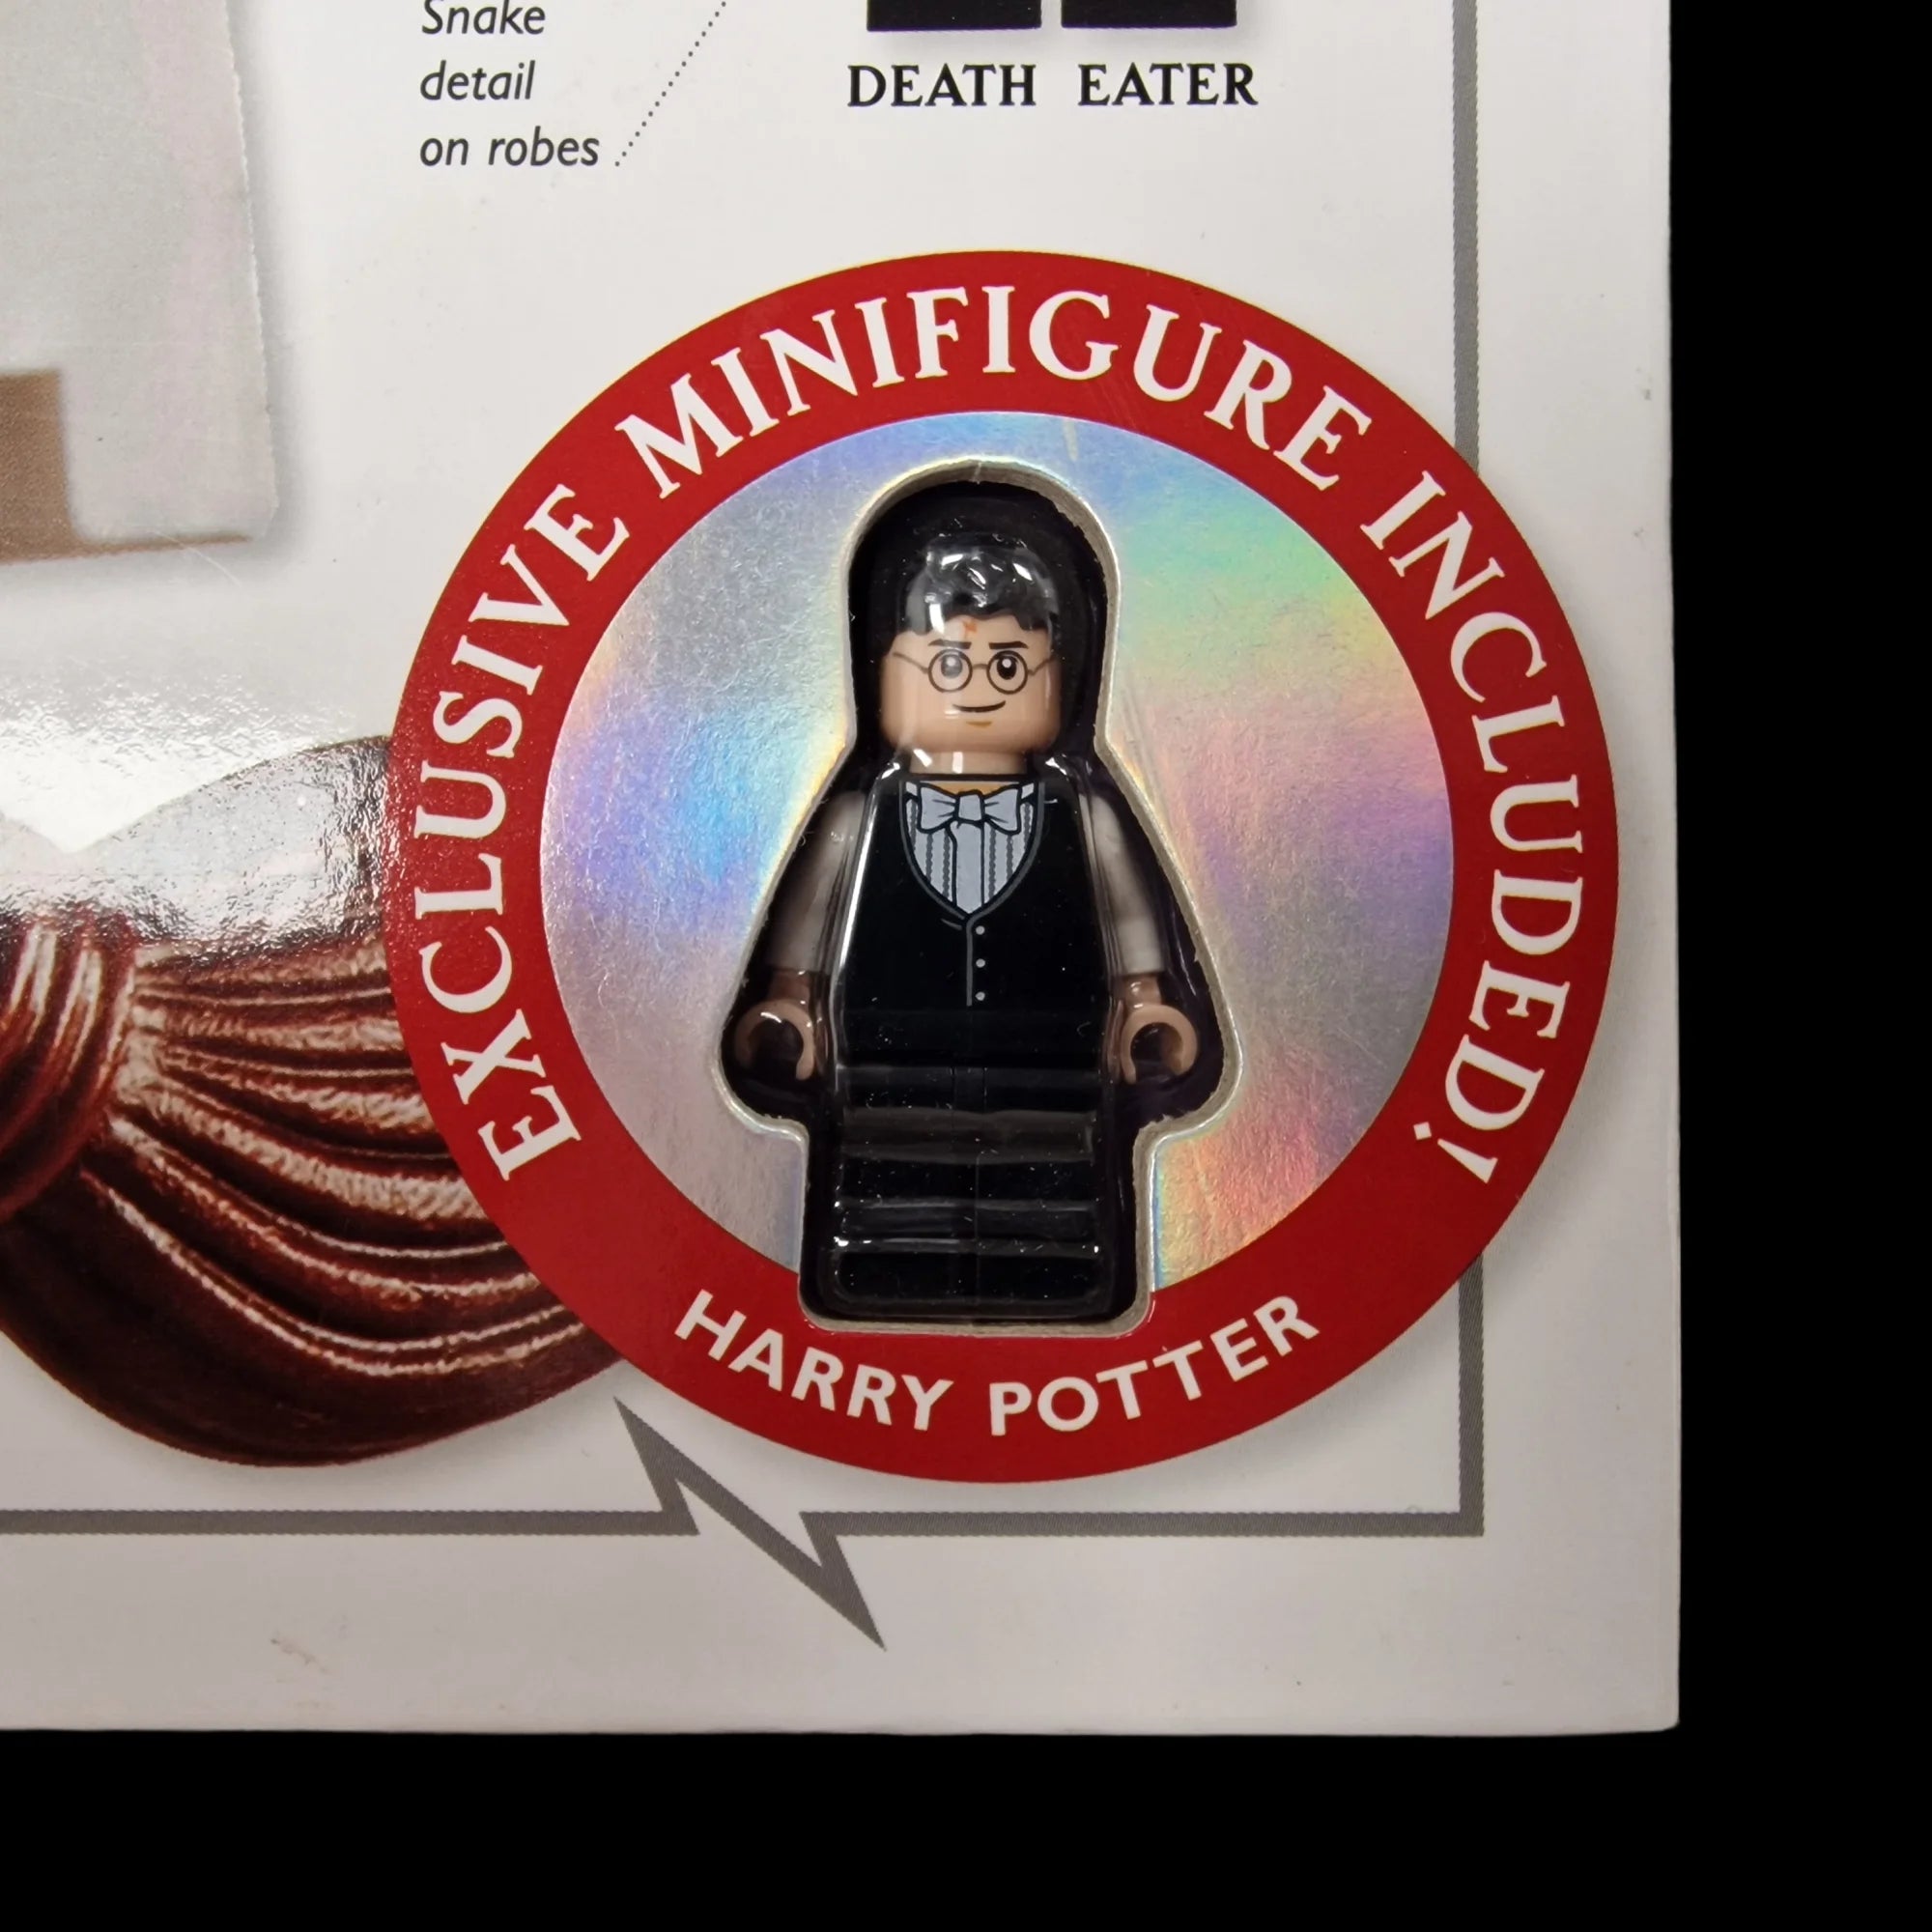 Lego Harry Potter Building The Magical World Book